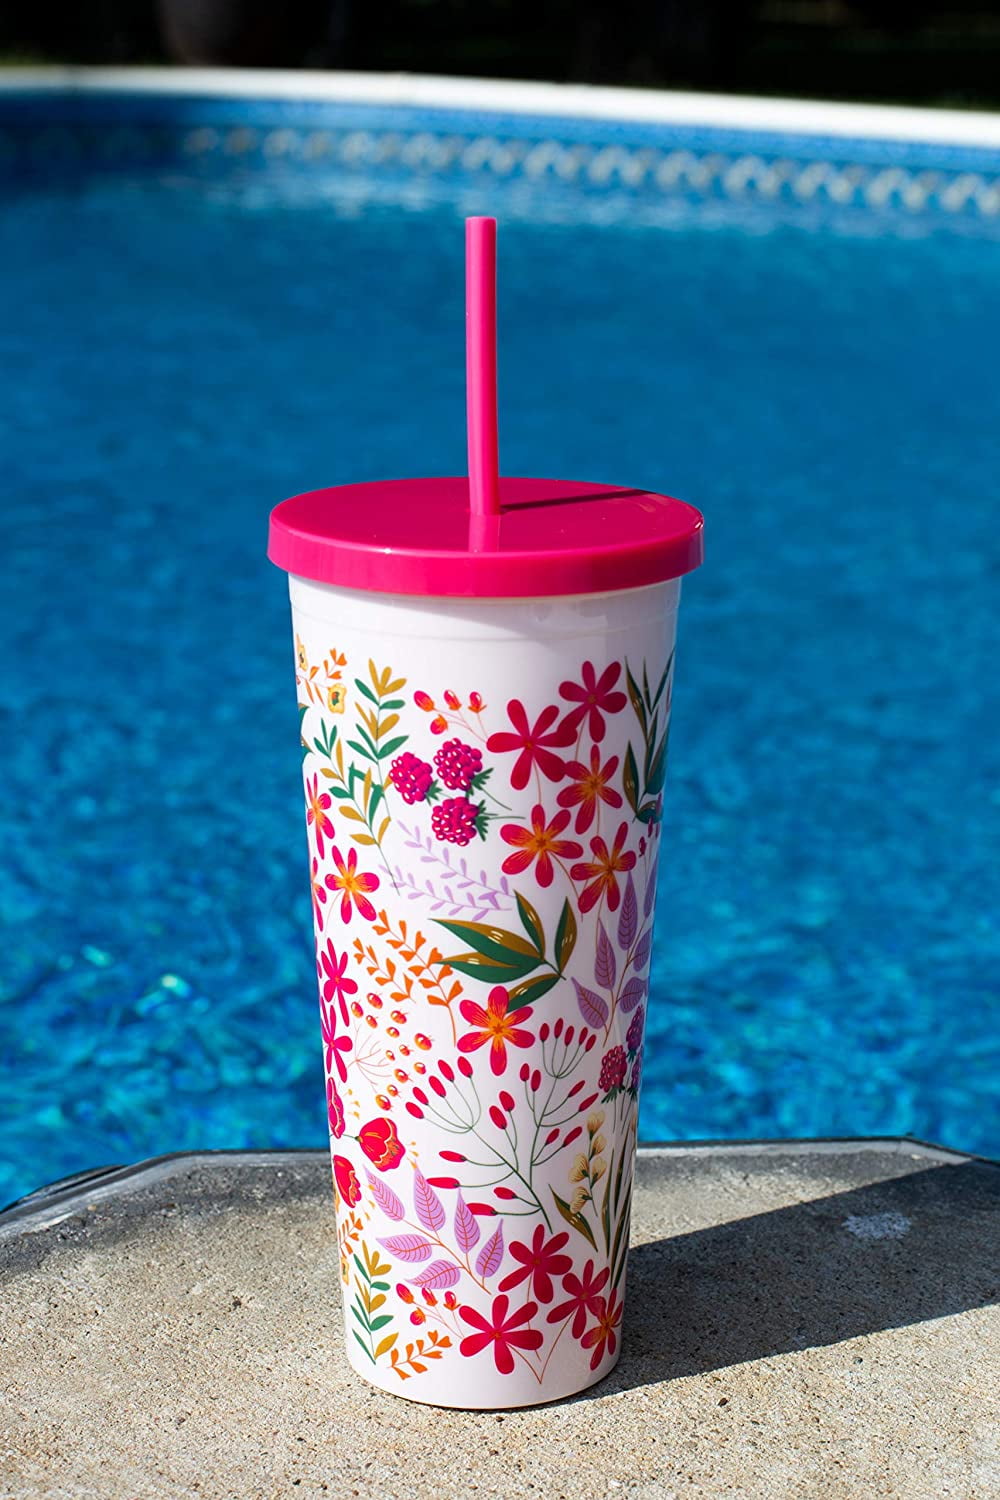 Steel Mill /& Co 24 Ounce Tumbler with Lid and Reusable Straw Floral Double Wall Insulated Travel Cup Pink Rose